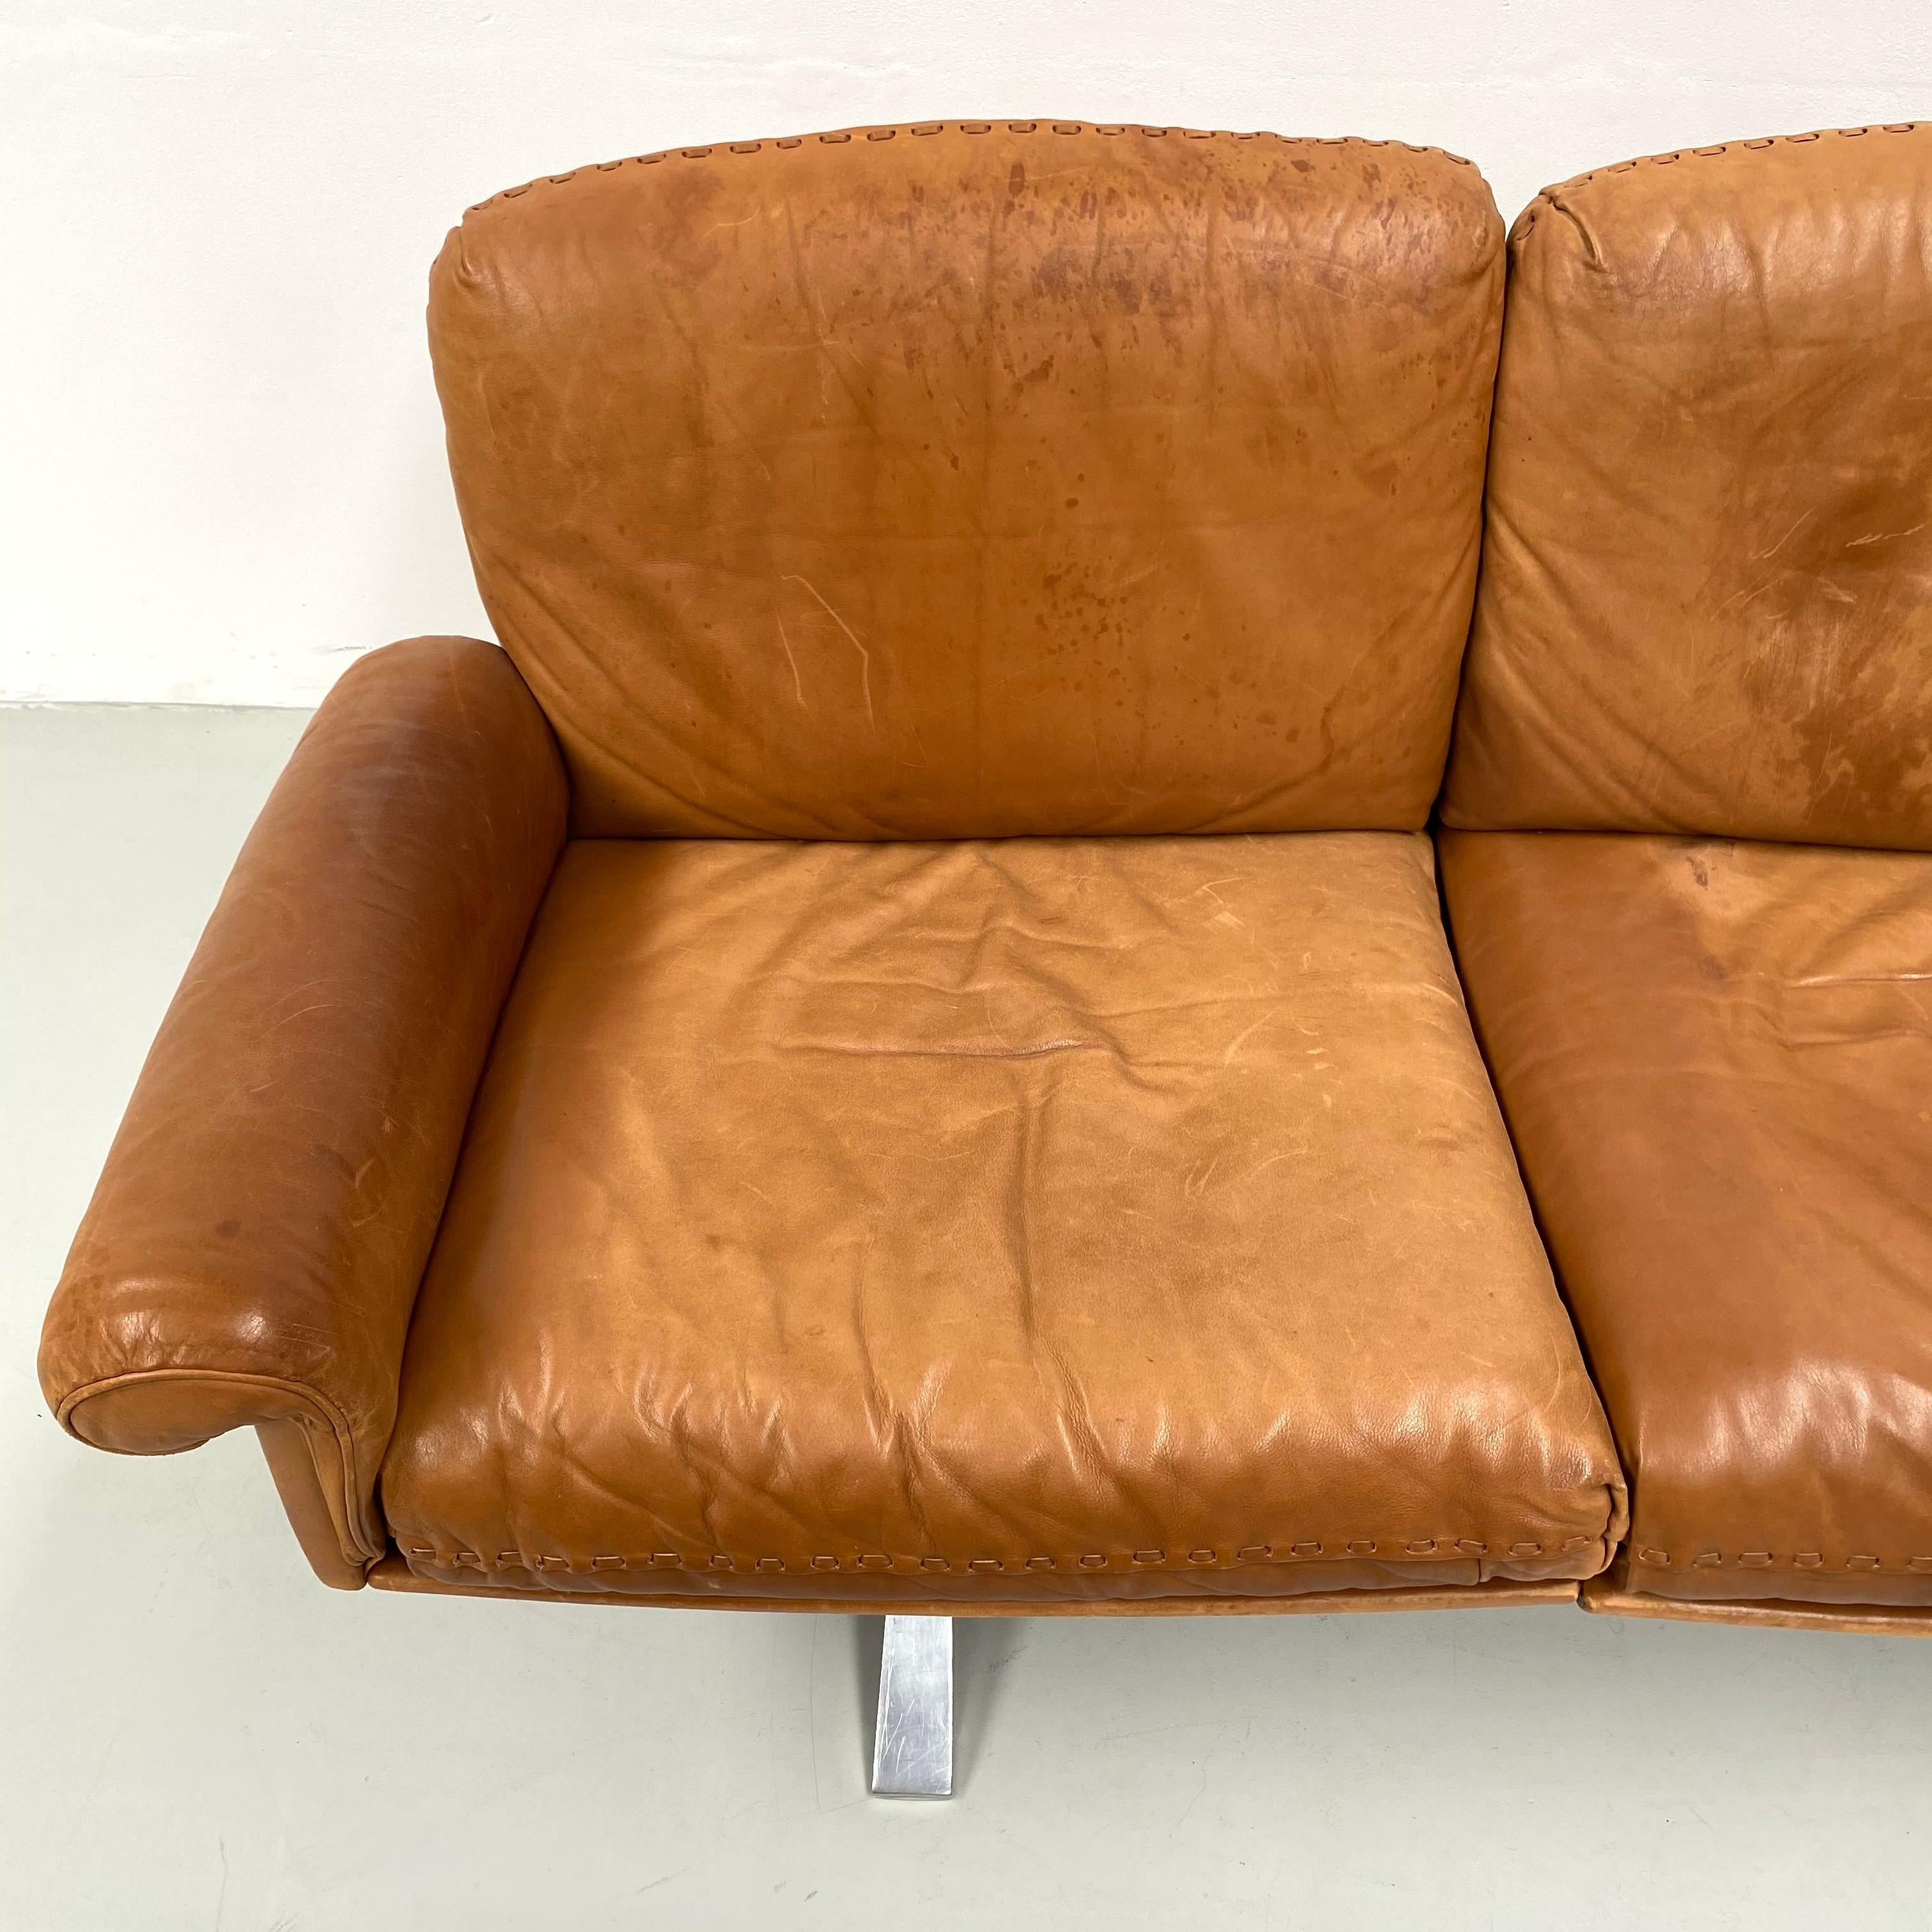 This mid-century 3-seater DS-31 -Sofa was designed by the DeSede-team in the seventies. This model series is one of the classics of DeSede from Switzerland. The design presents itself in a light look : back and seat cushions rest on a thin, leather